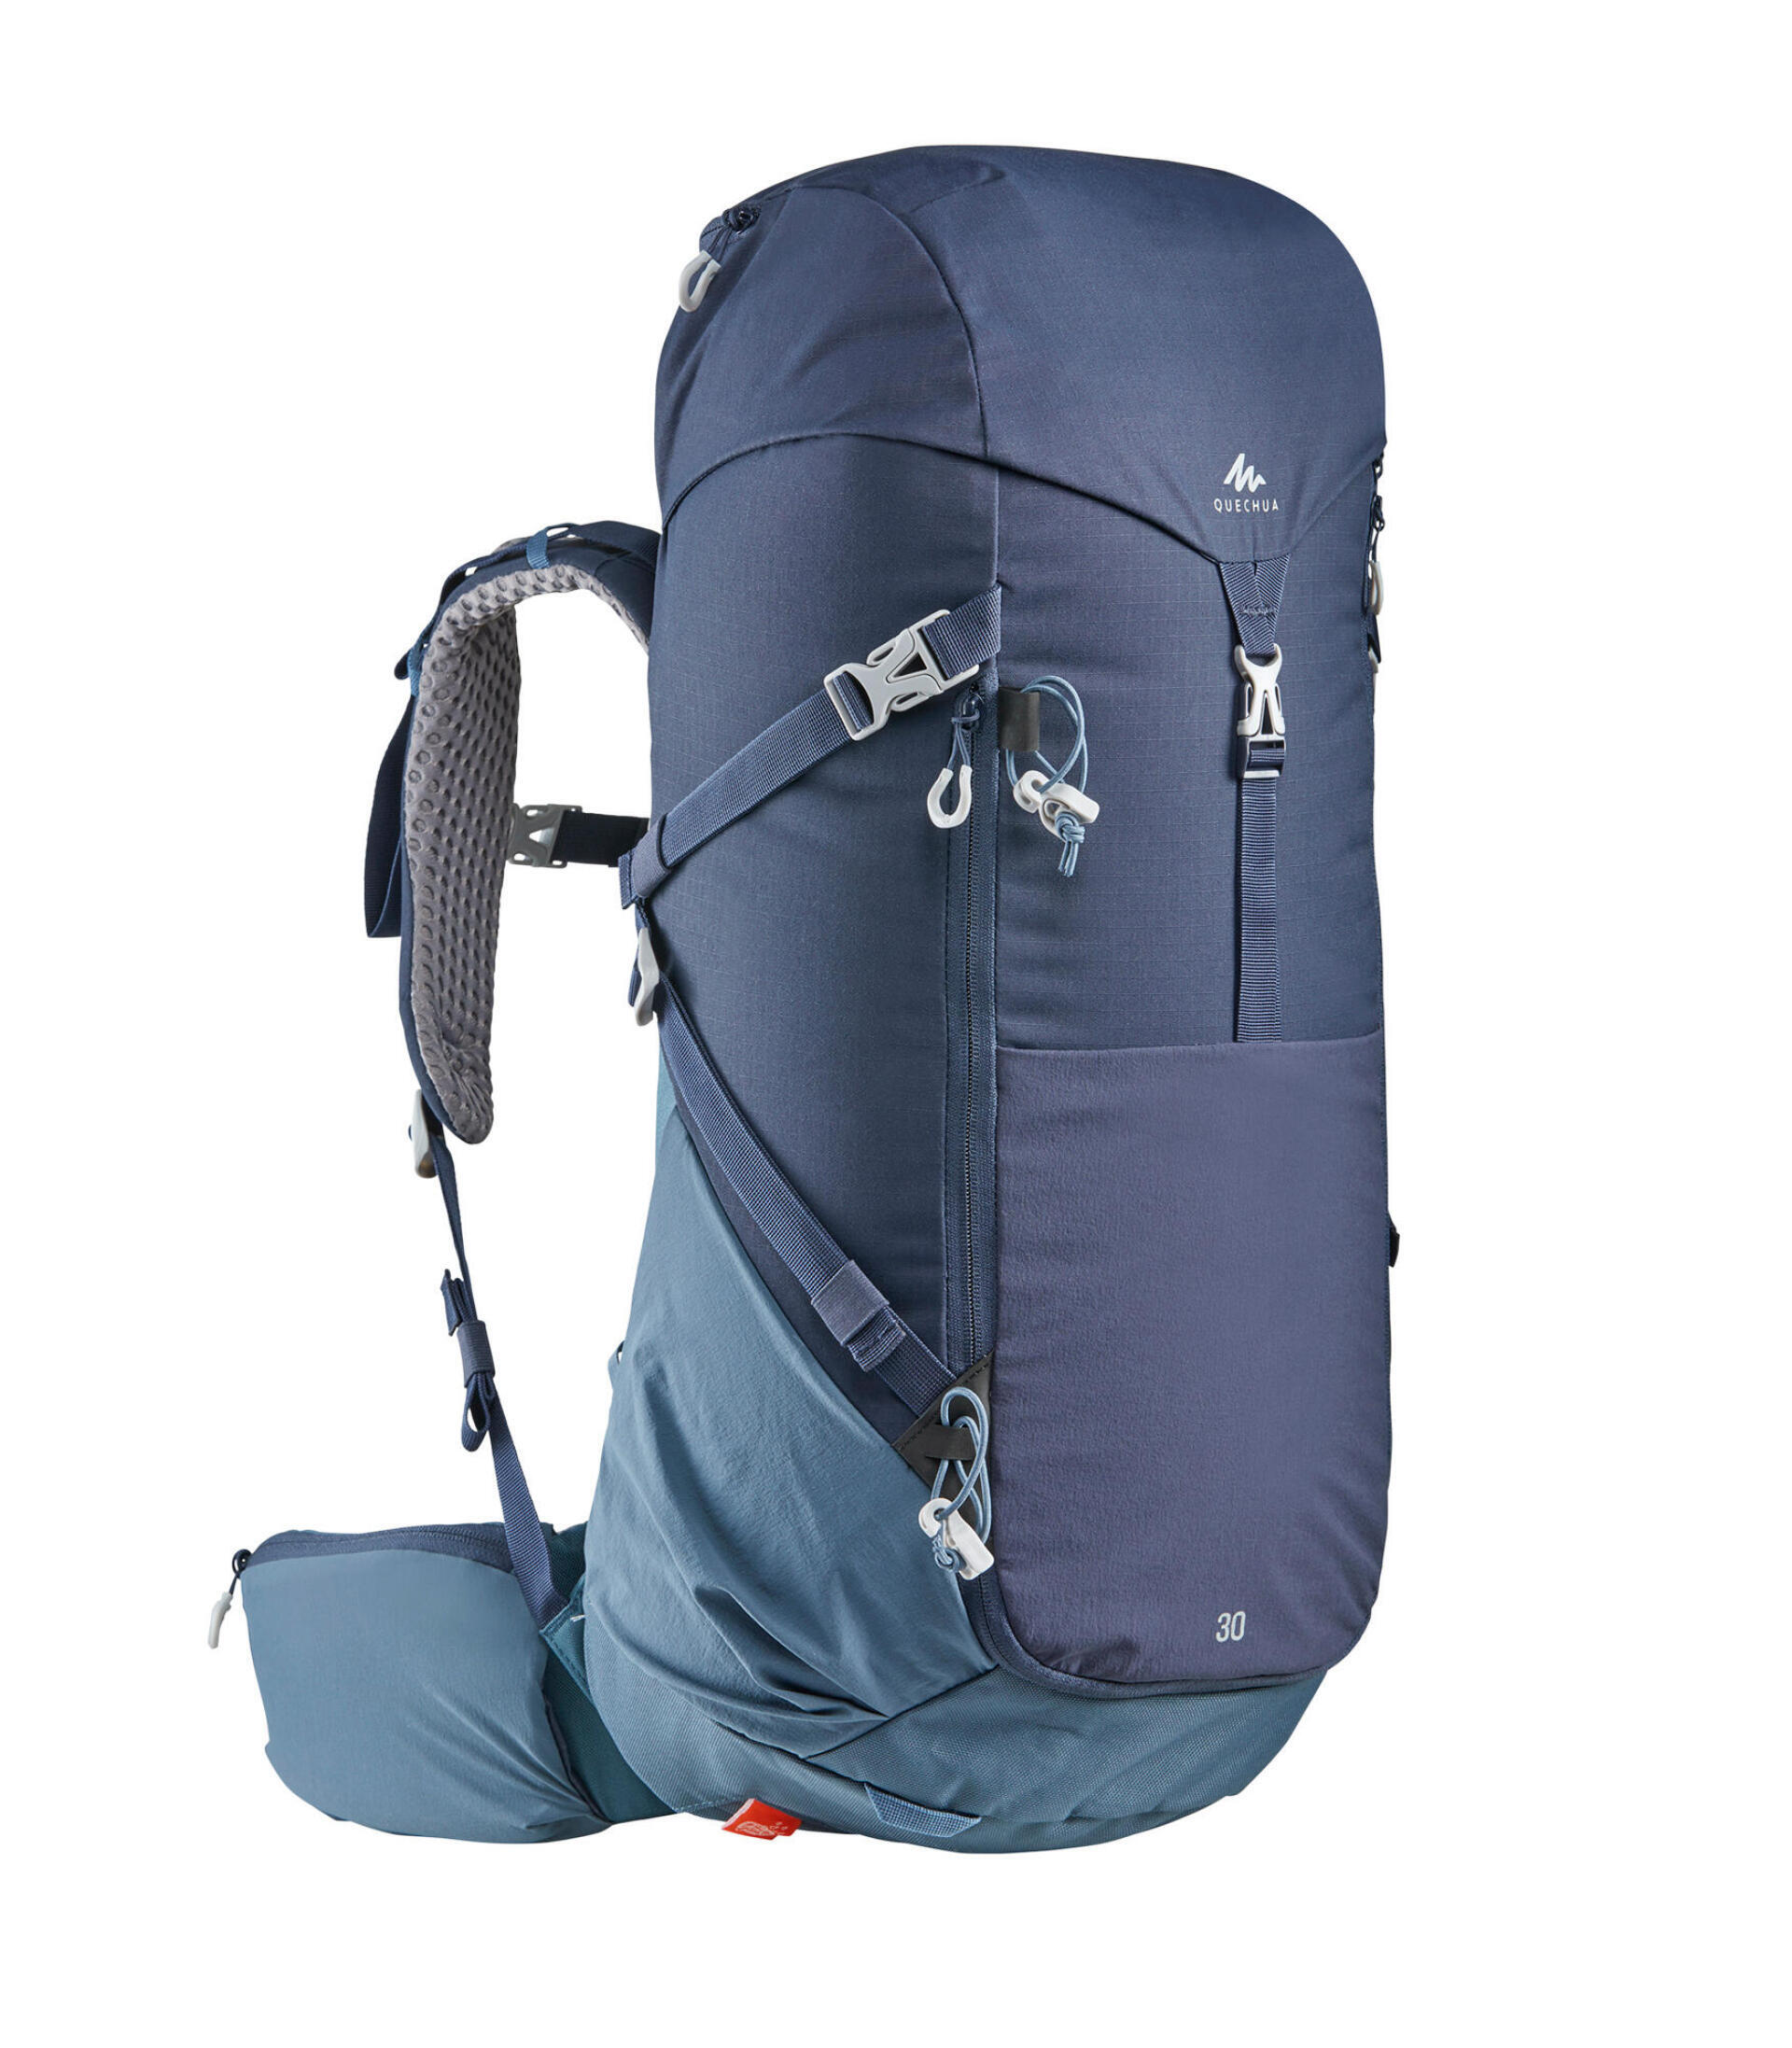 Choosing your bag for a day hike